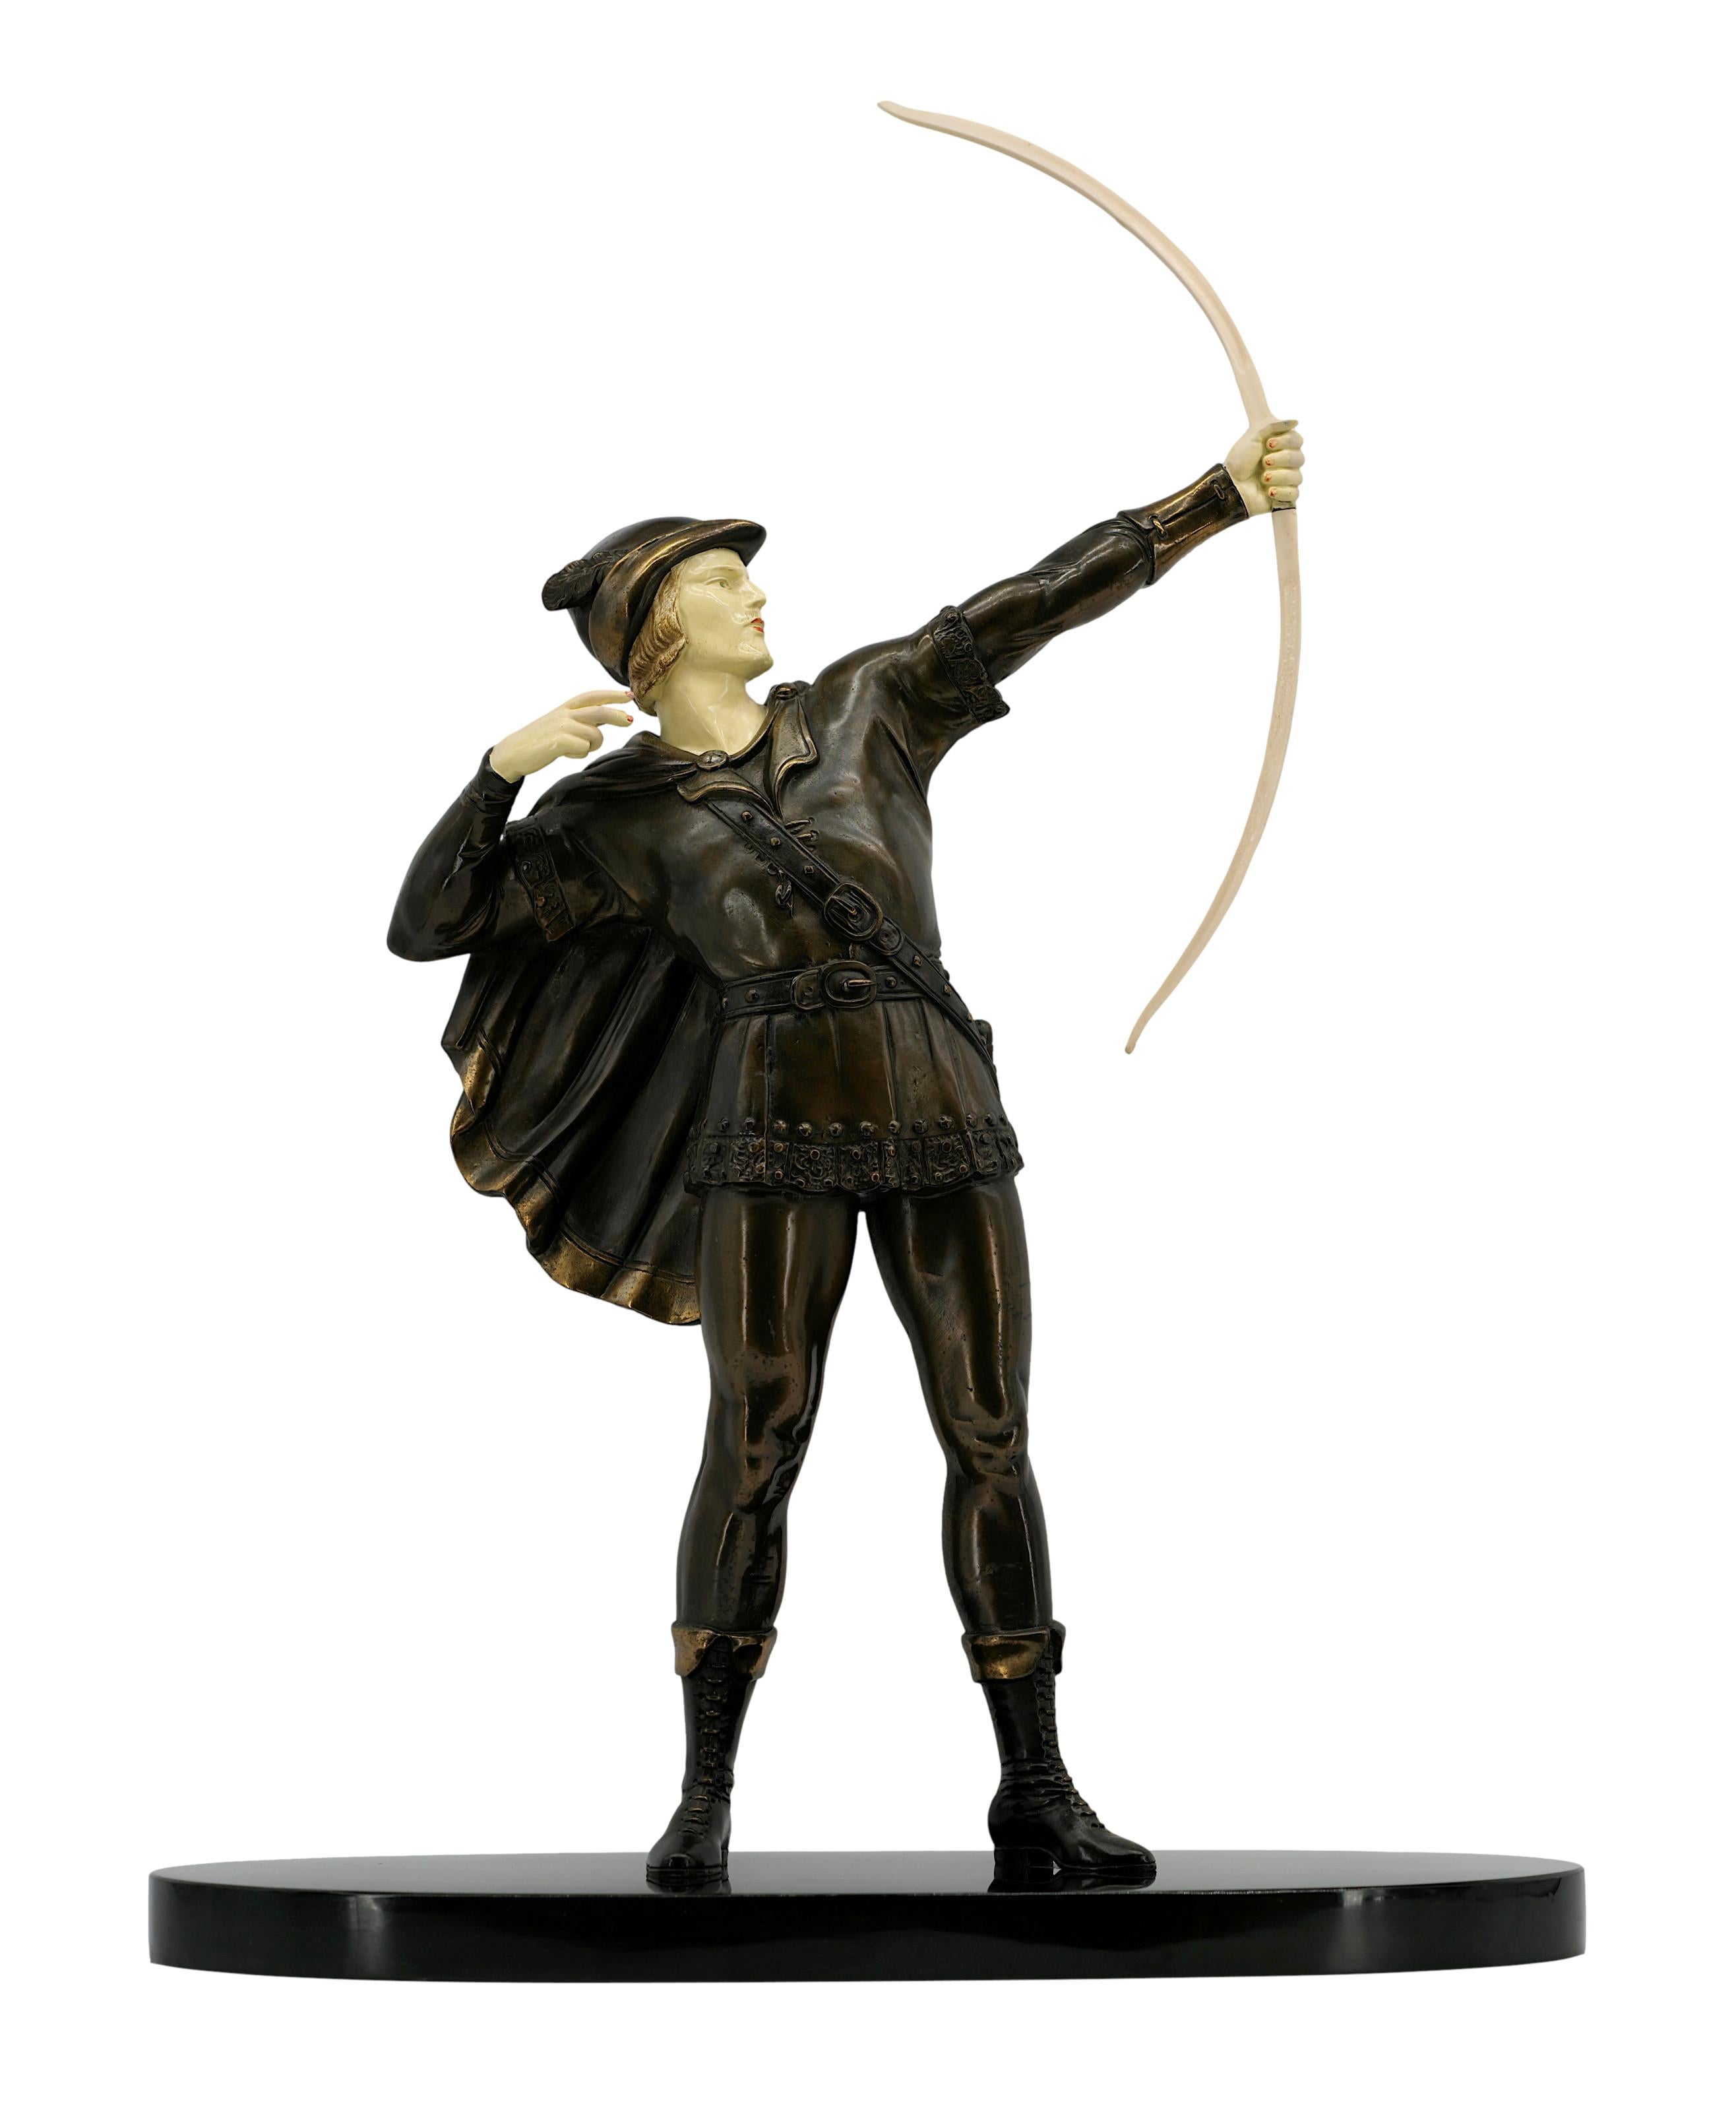 French Art Deco Robin Hood Sculpture, 1930s In Good Condition For Sale In Saint-Amans-des-Cots, FR